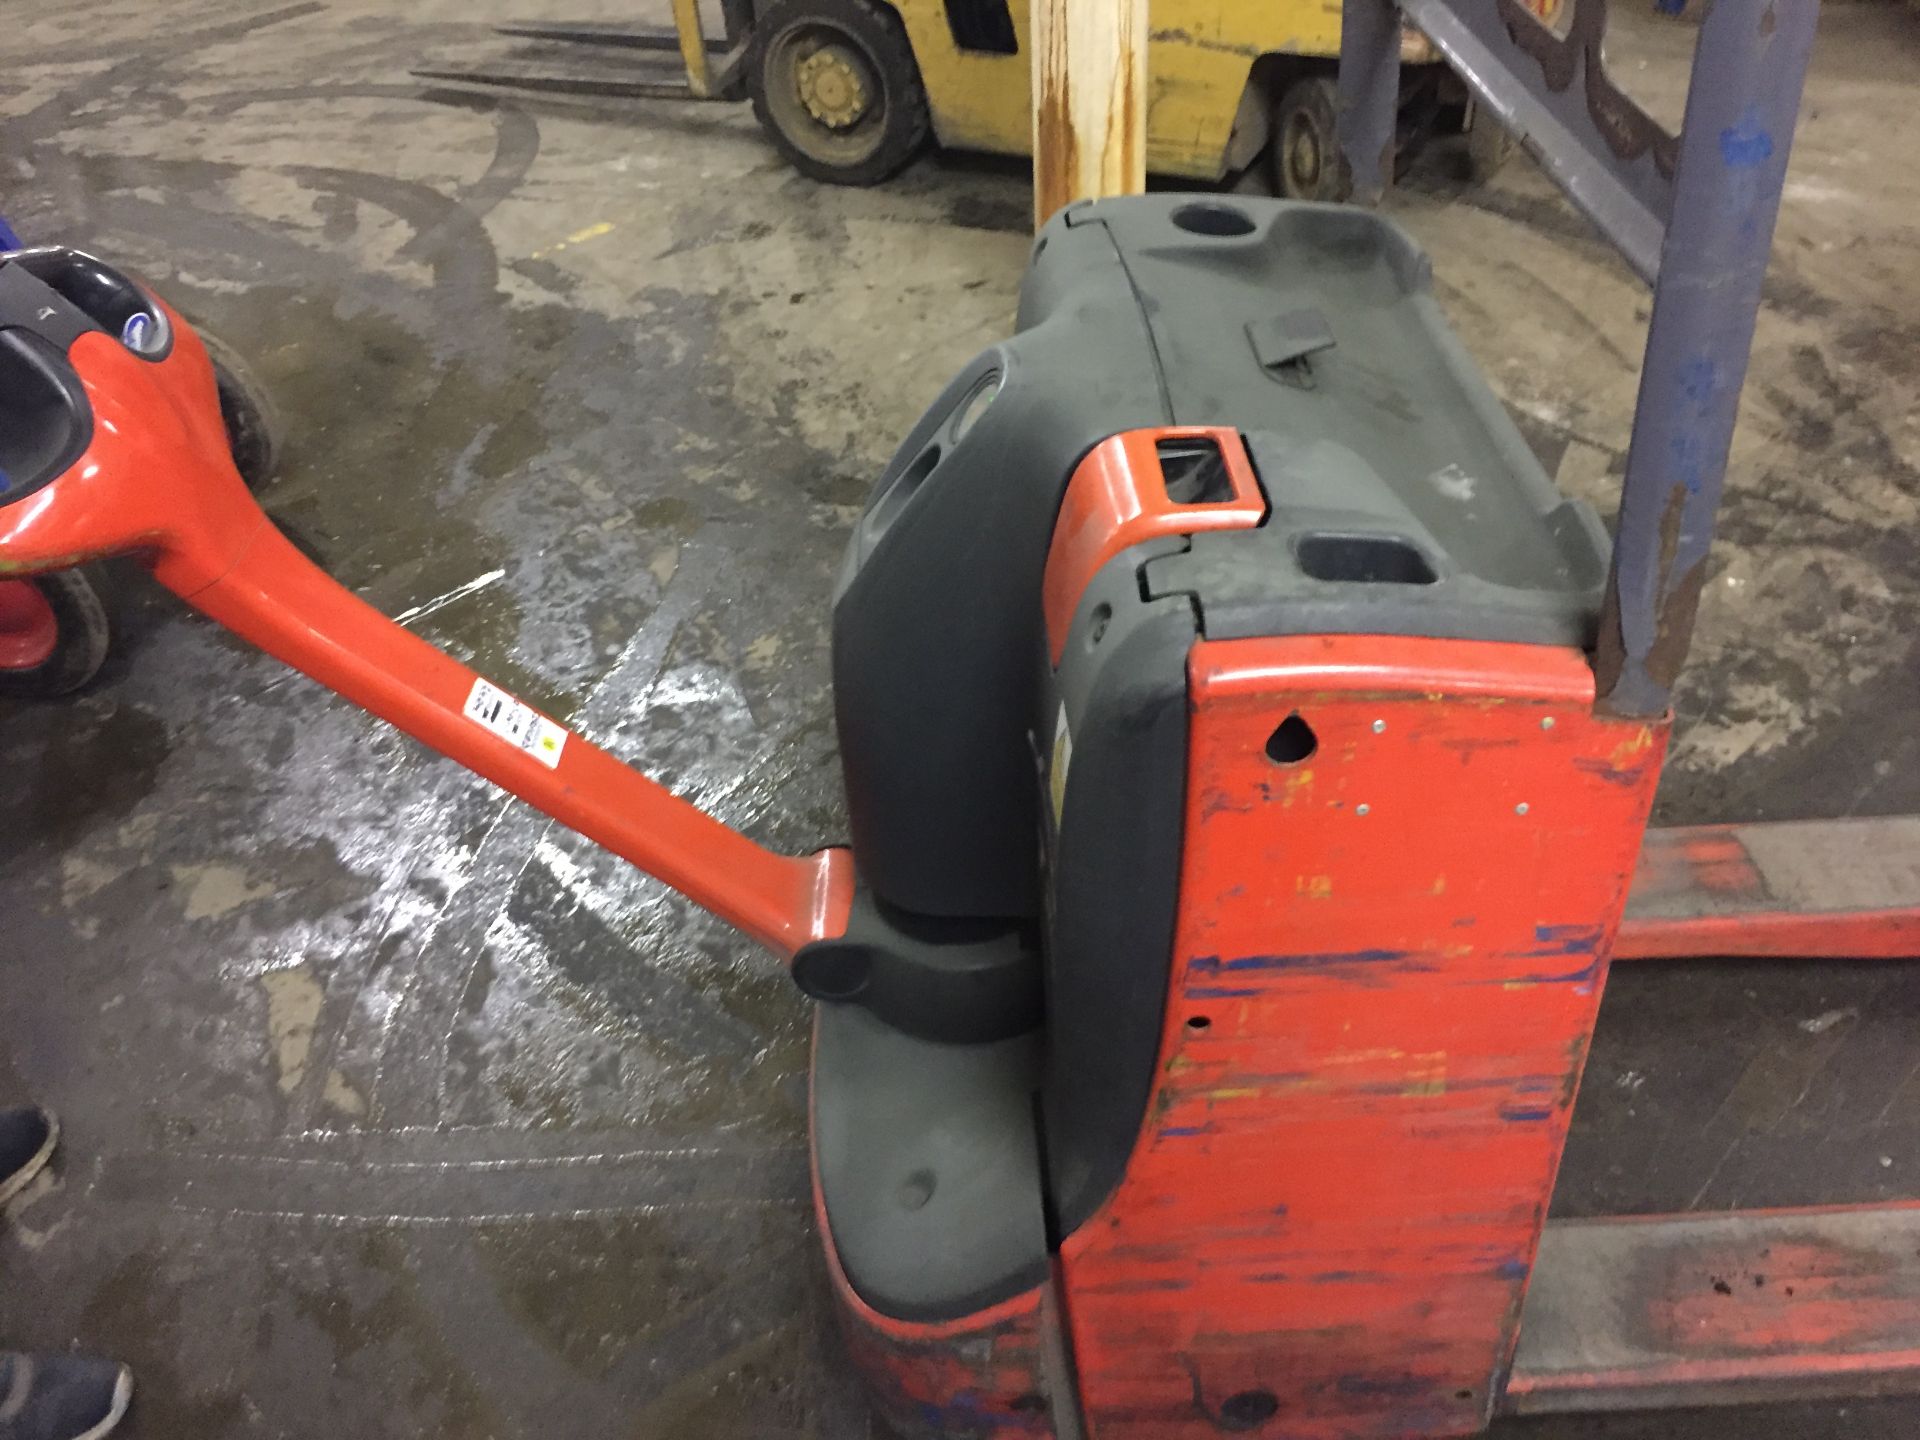 1 x Linde T20 Electric Pallet Truck - Tested and Working - Includes Key and Charger - CL007 - Ref: - Image 2 of 6